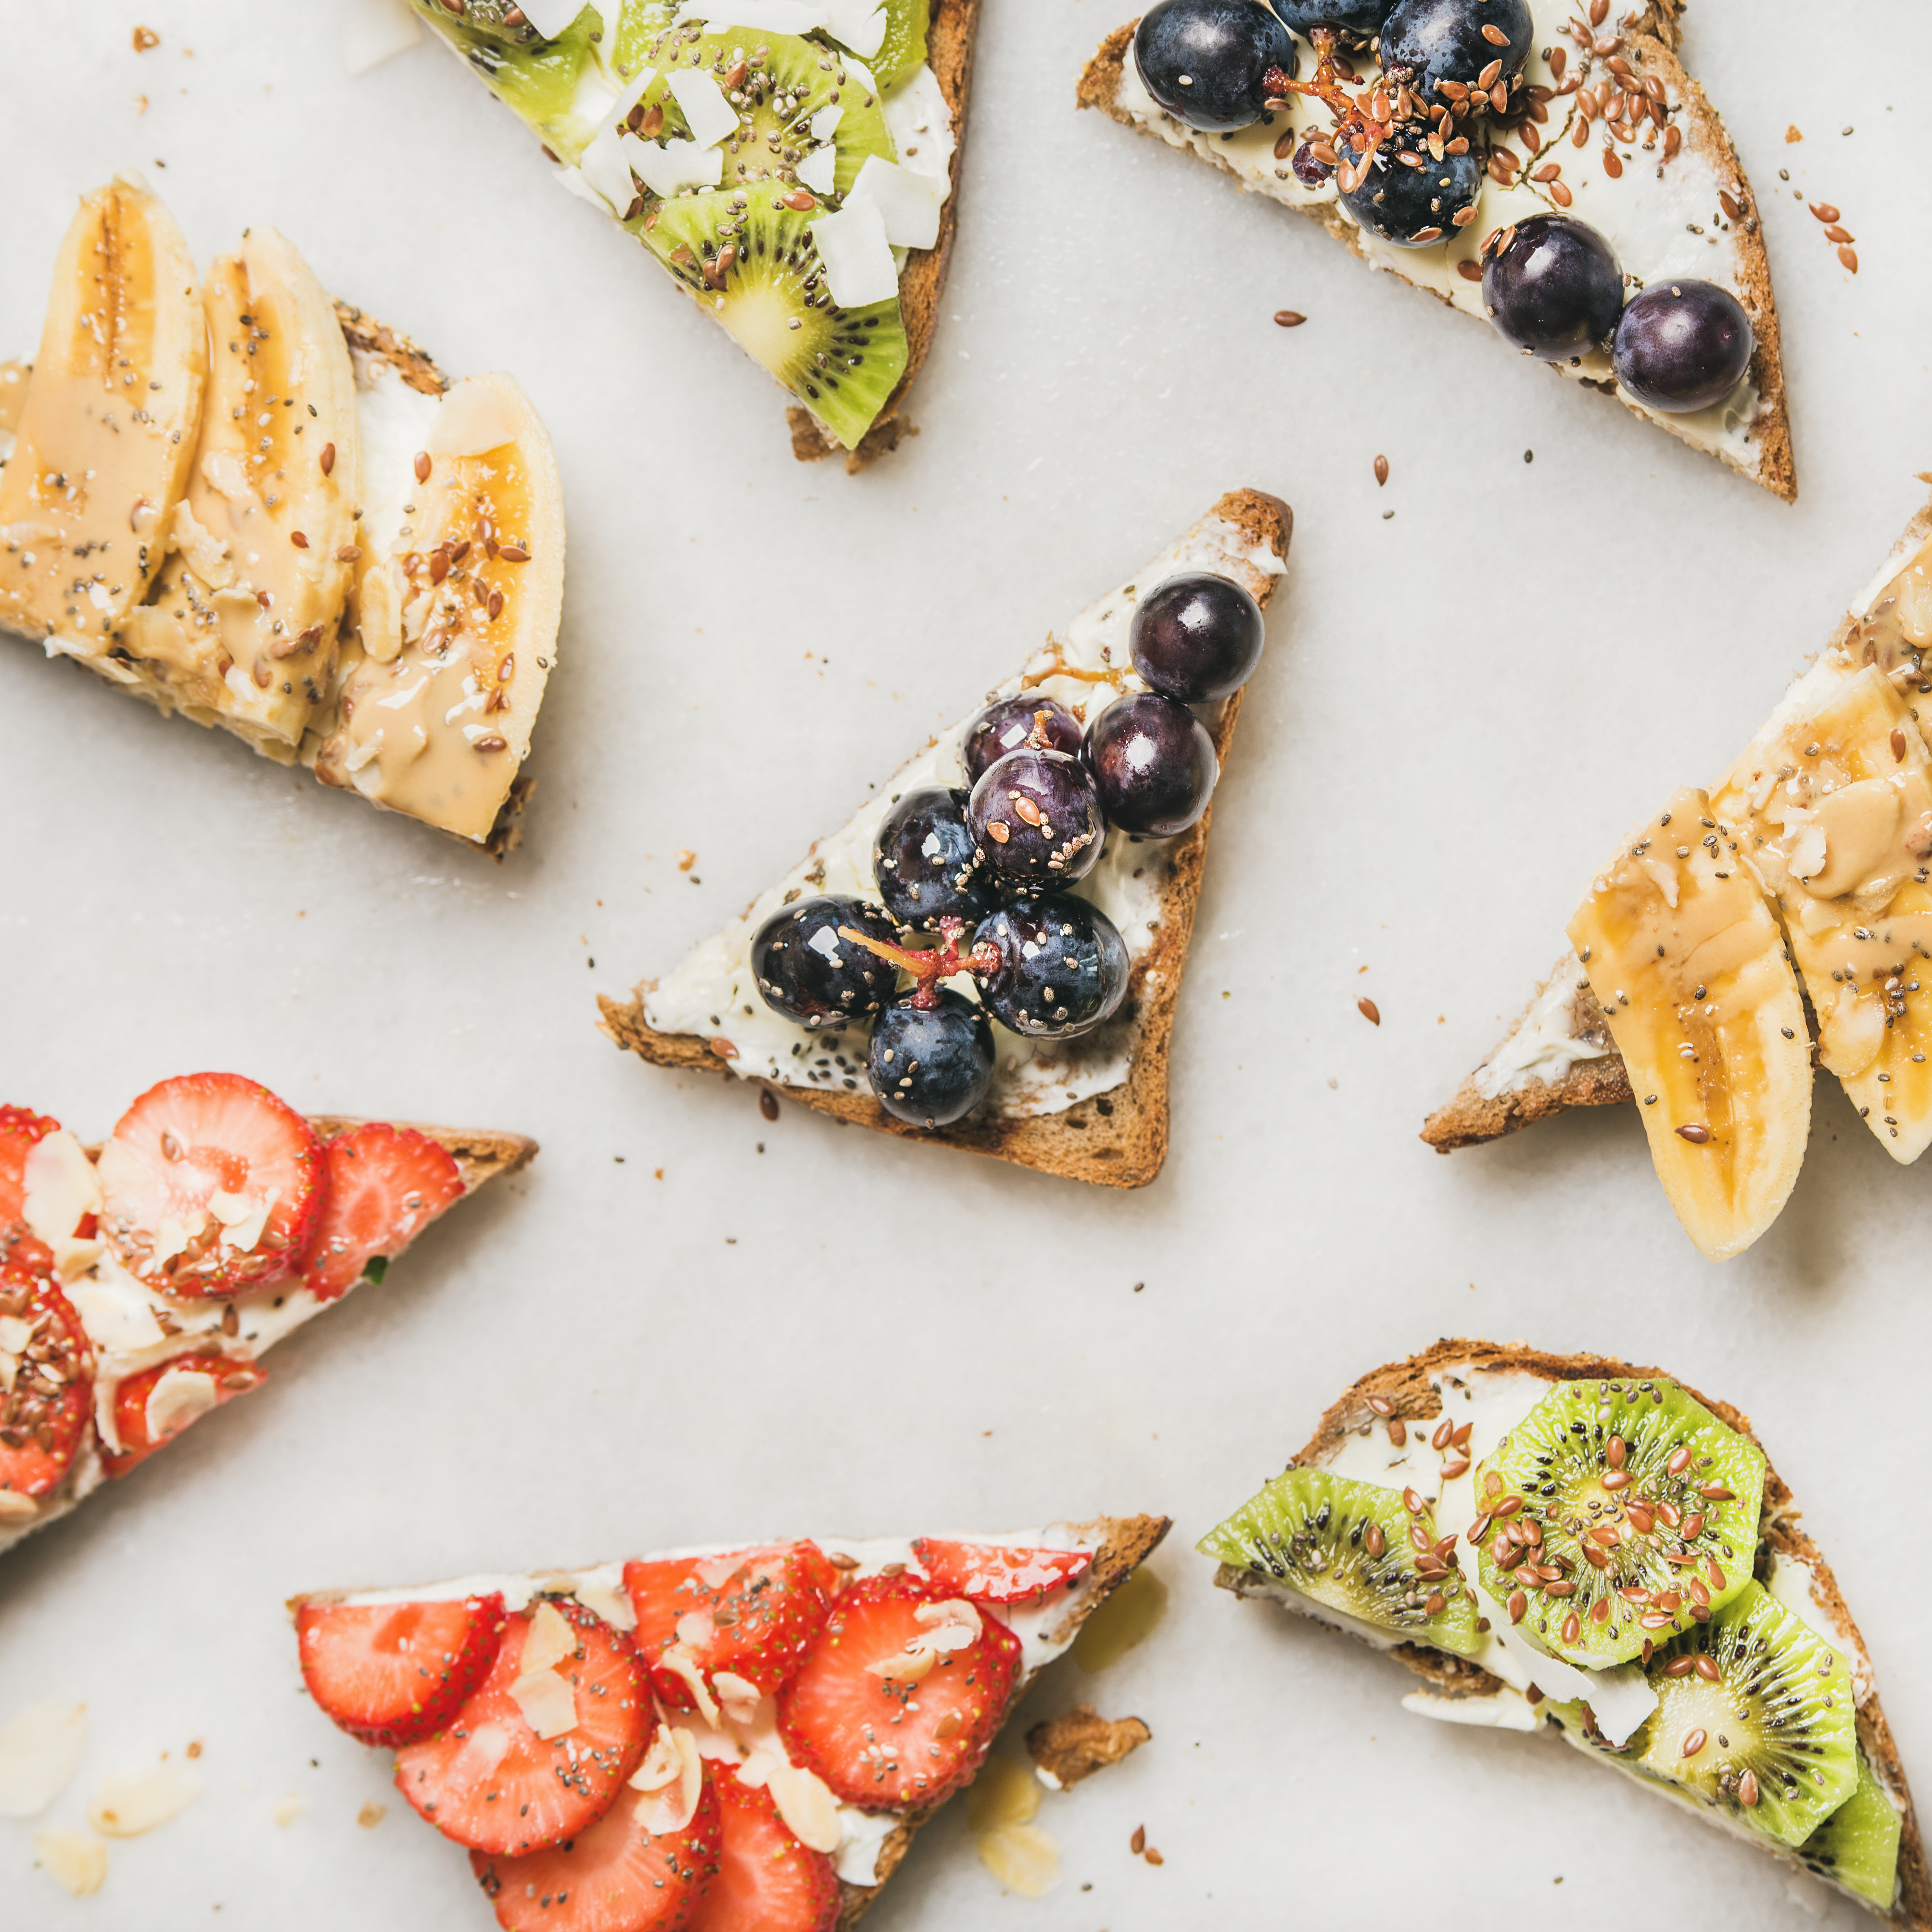 Healthy breakfast toast pieces. Wholegrain bread slices with cream cheese, various fruit, seeds and nuts. Top view, grey marble background, square crop. Clean eating, vegetarian, dieting concept